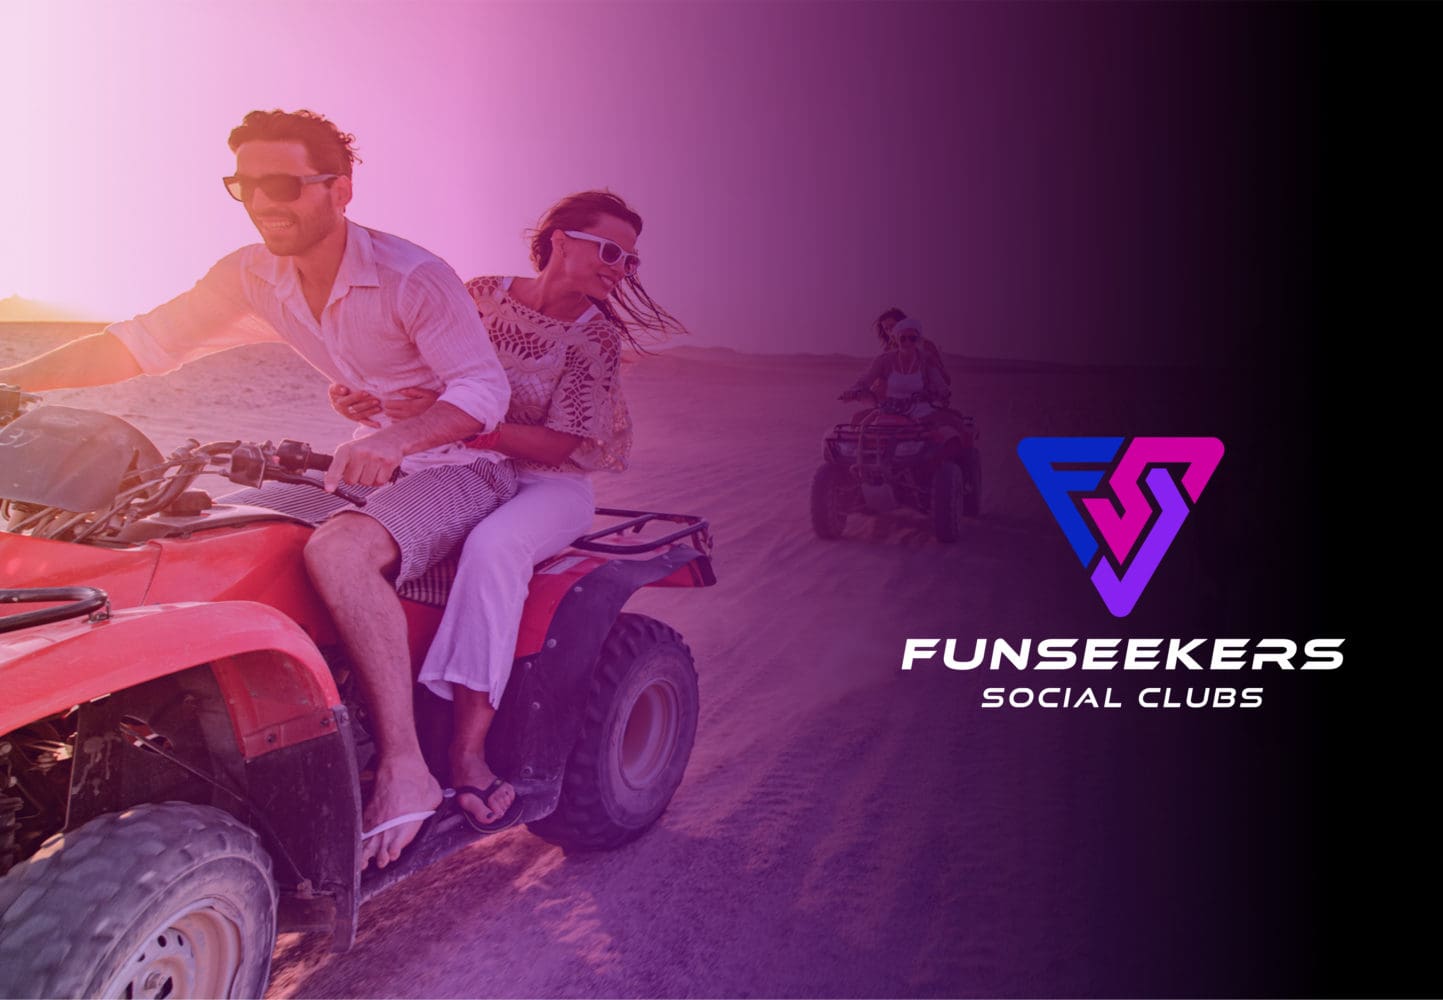 Funseekers - Agency Creative is excited to announce our new client Funseekers, an all access social and travel club for singles and couples.